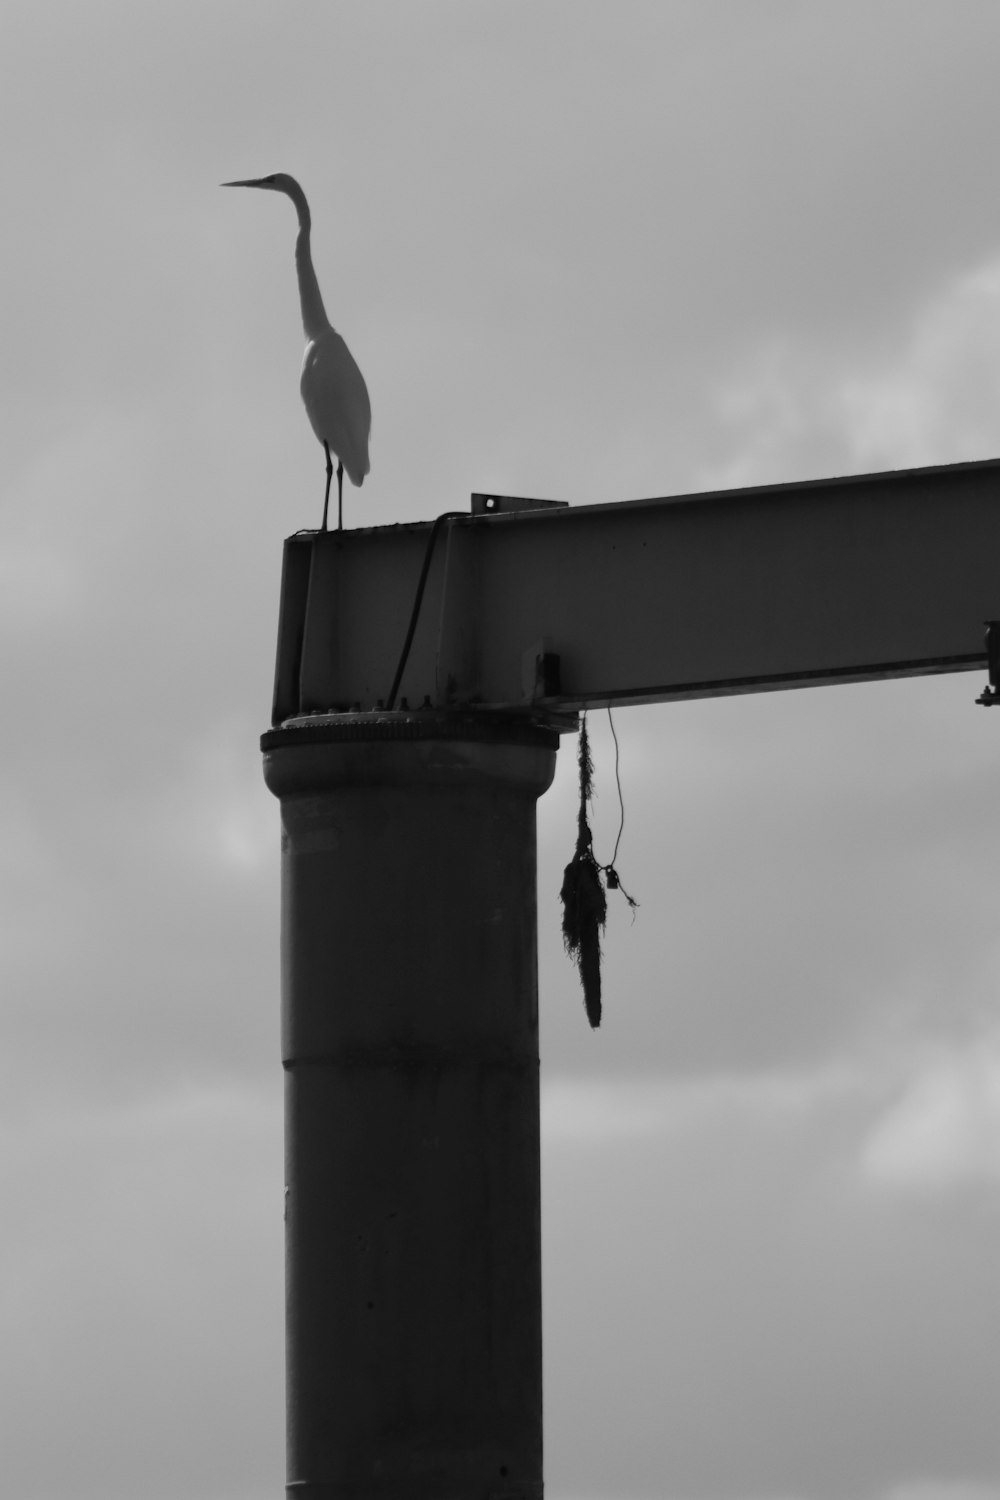 a crane is standing on top of a pole